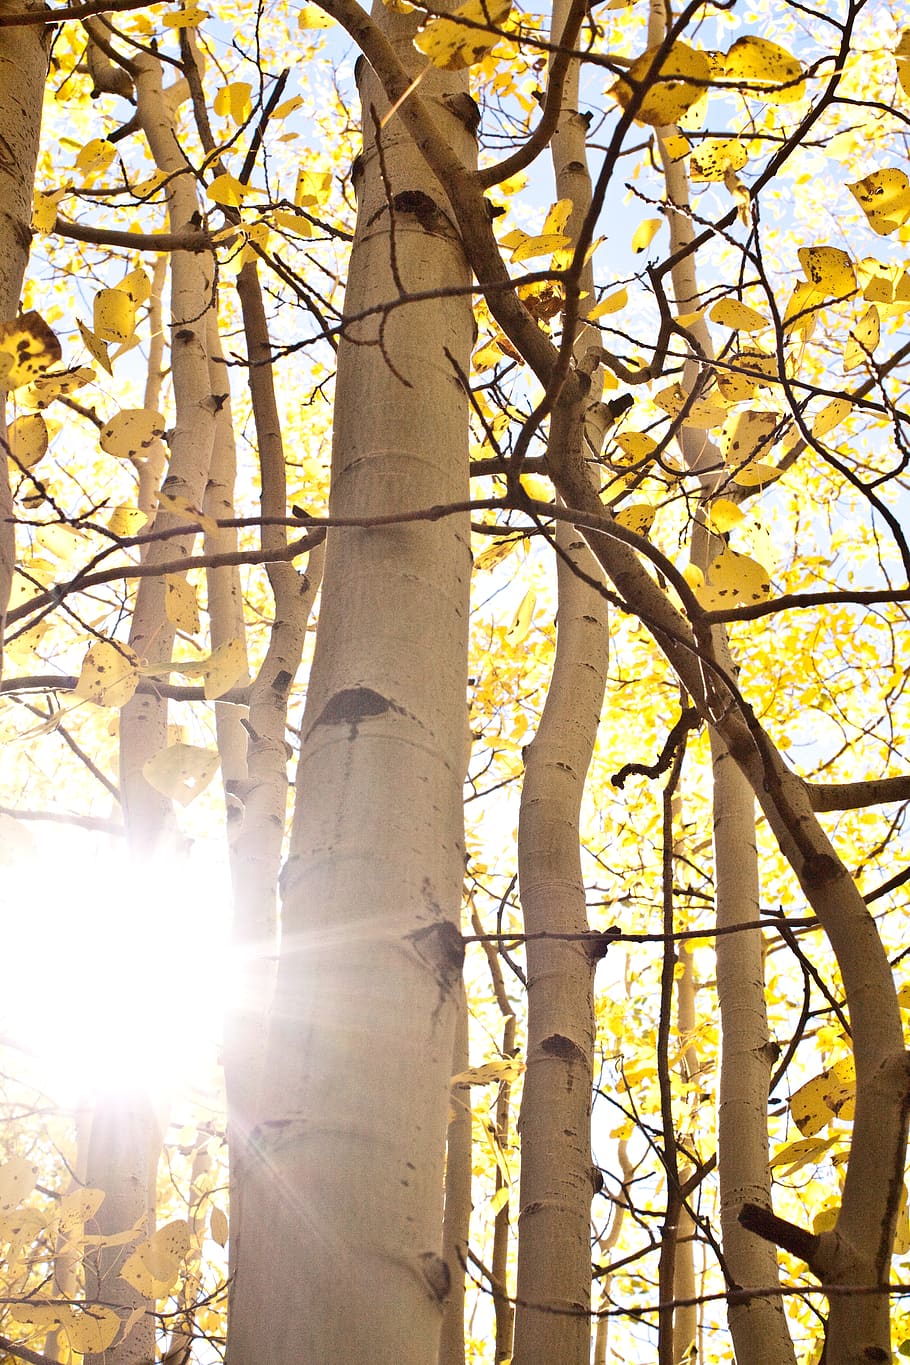 Page 8 - aspens 1080P, 2K, 4K, 5K HD wallpapers free download, sort by relevance - Wallpaper Flare